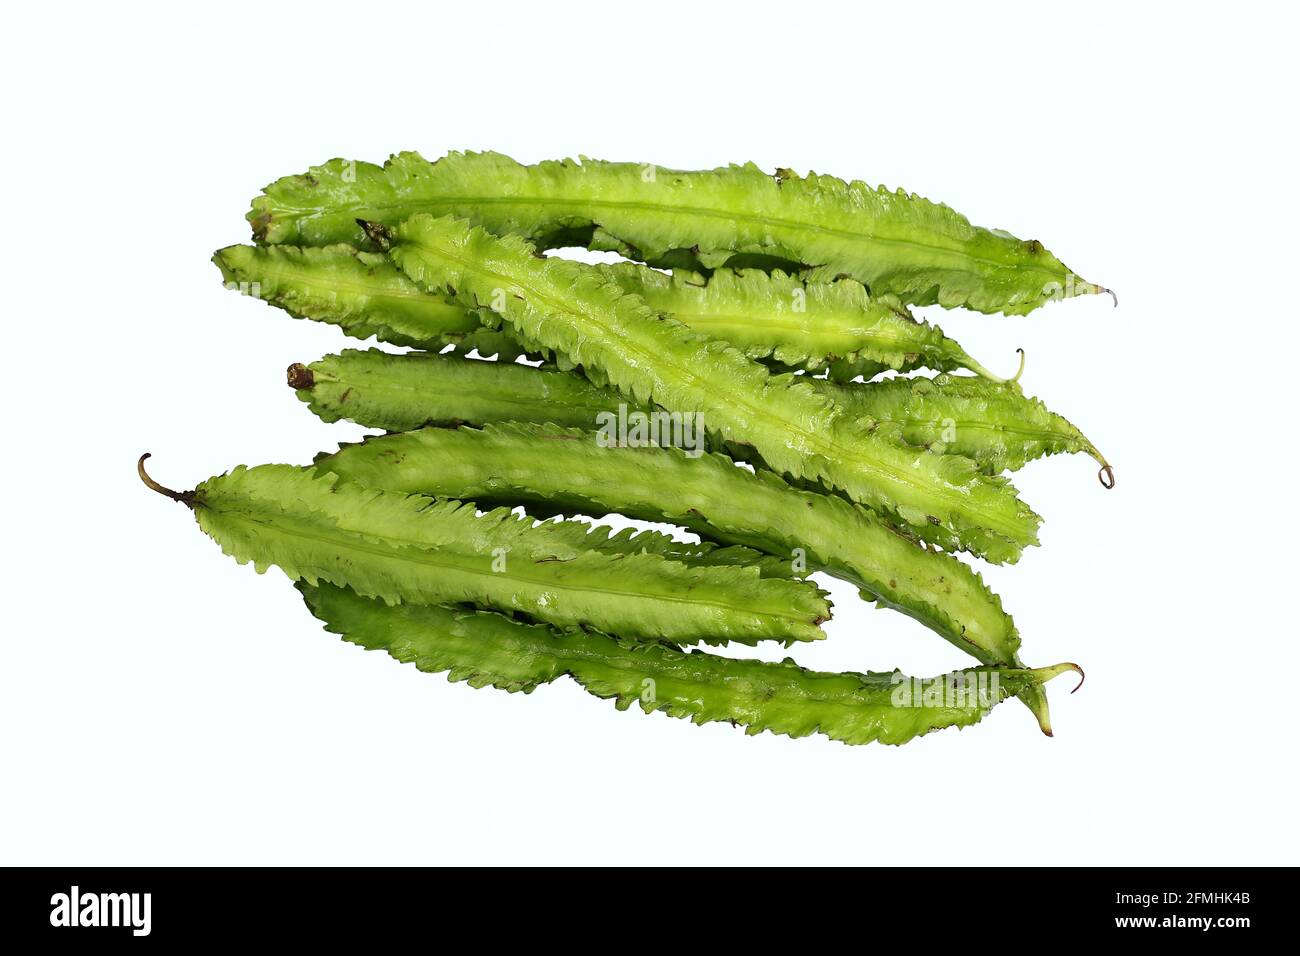 Overhead view of few isolated green winged bean pods Stock Photo